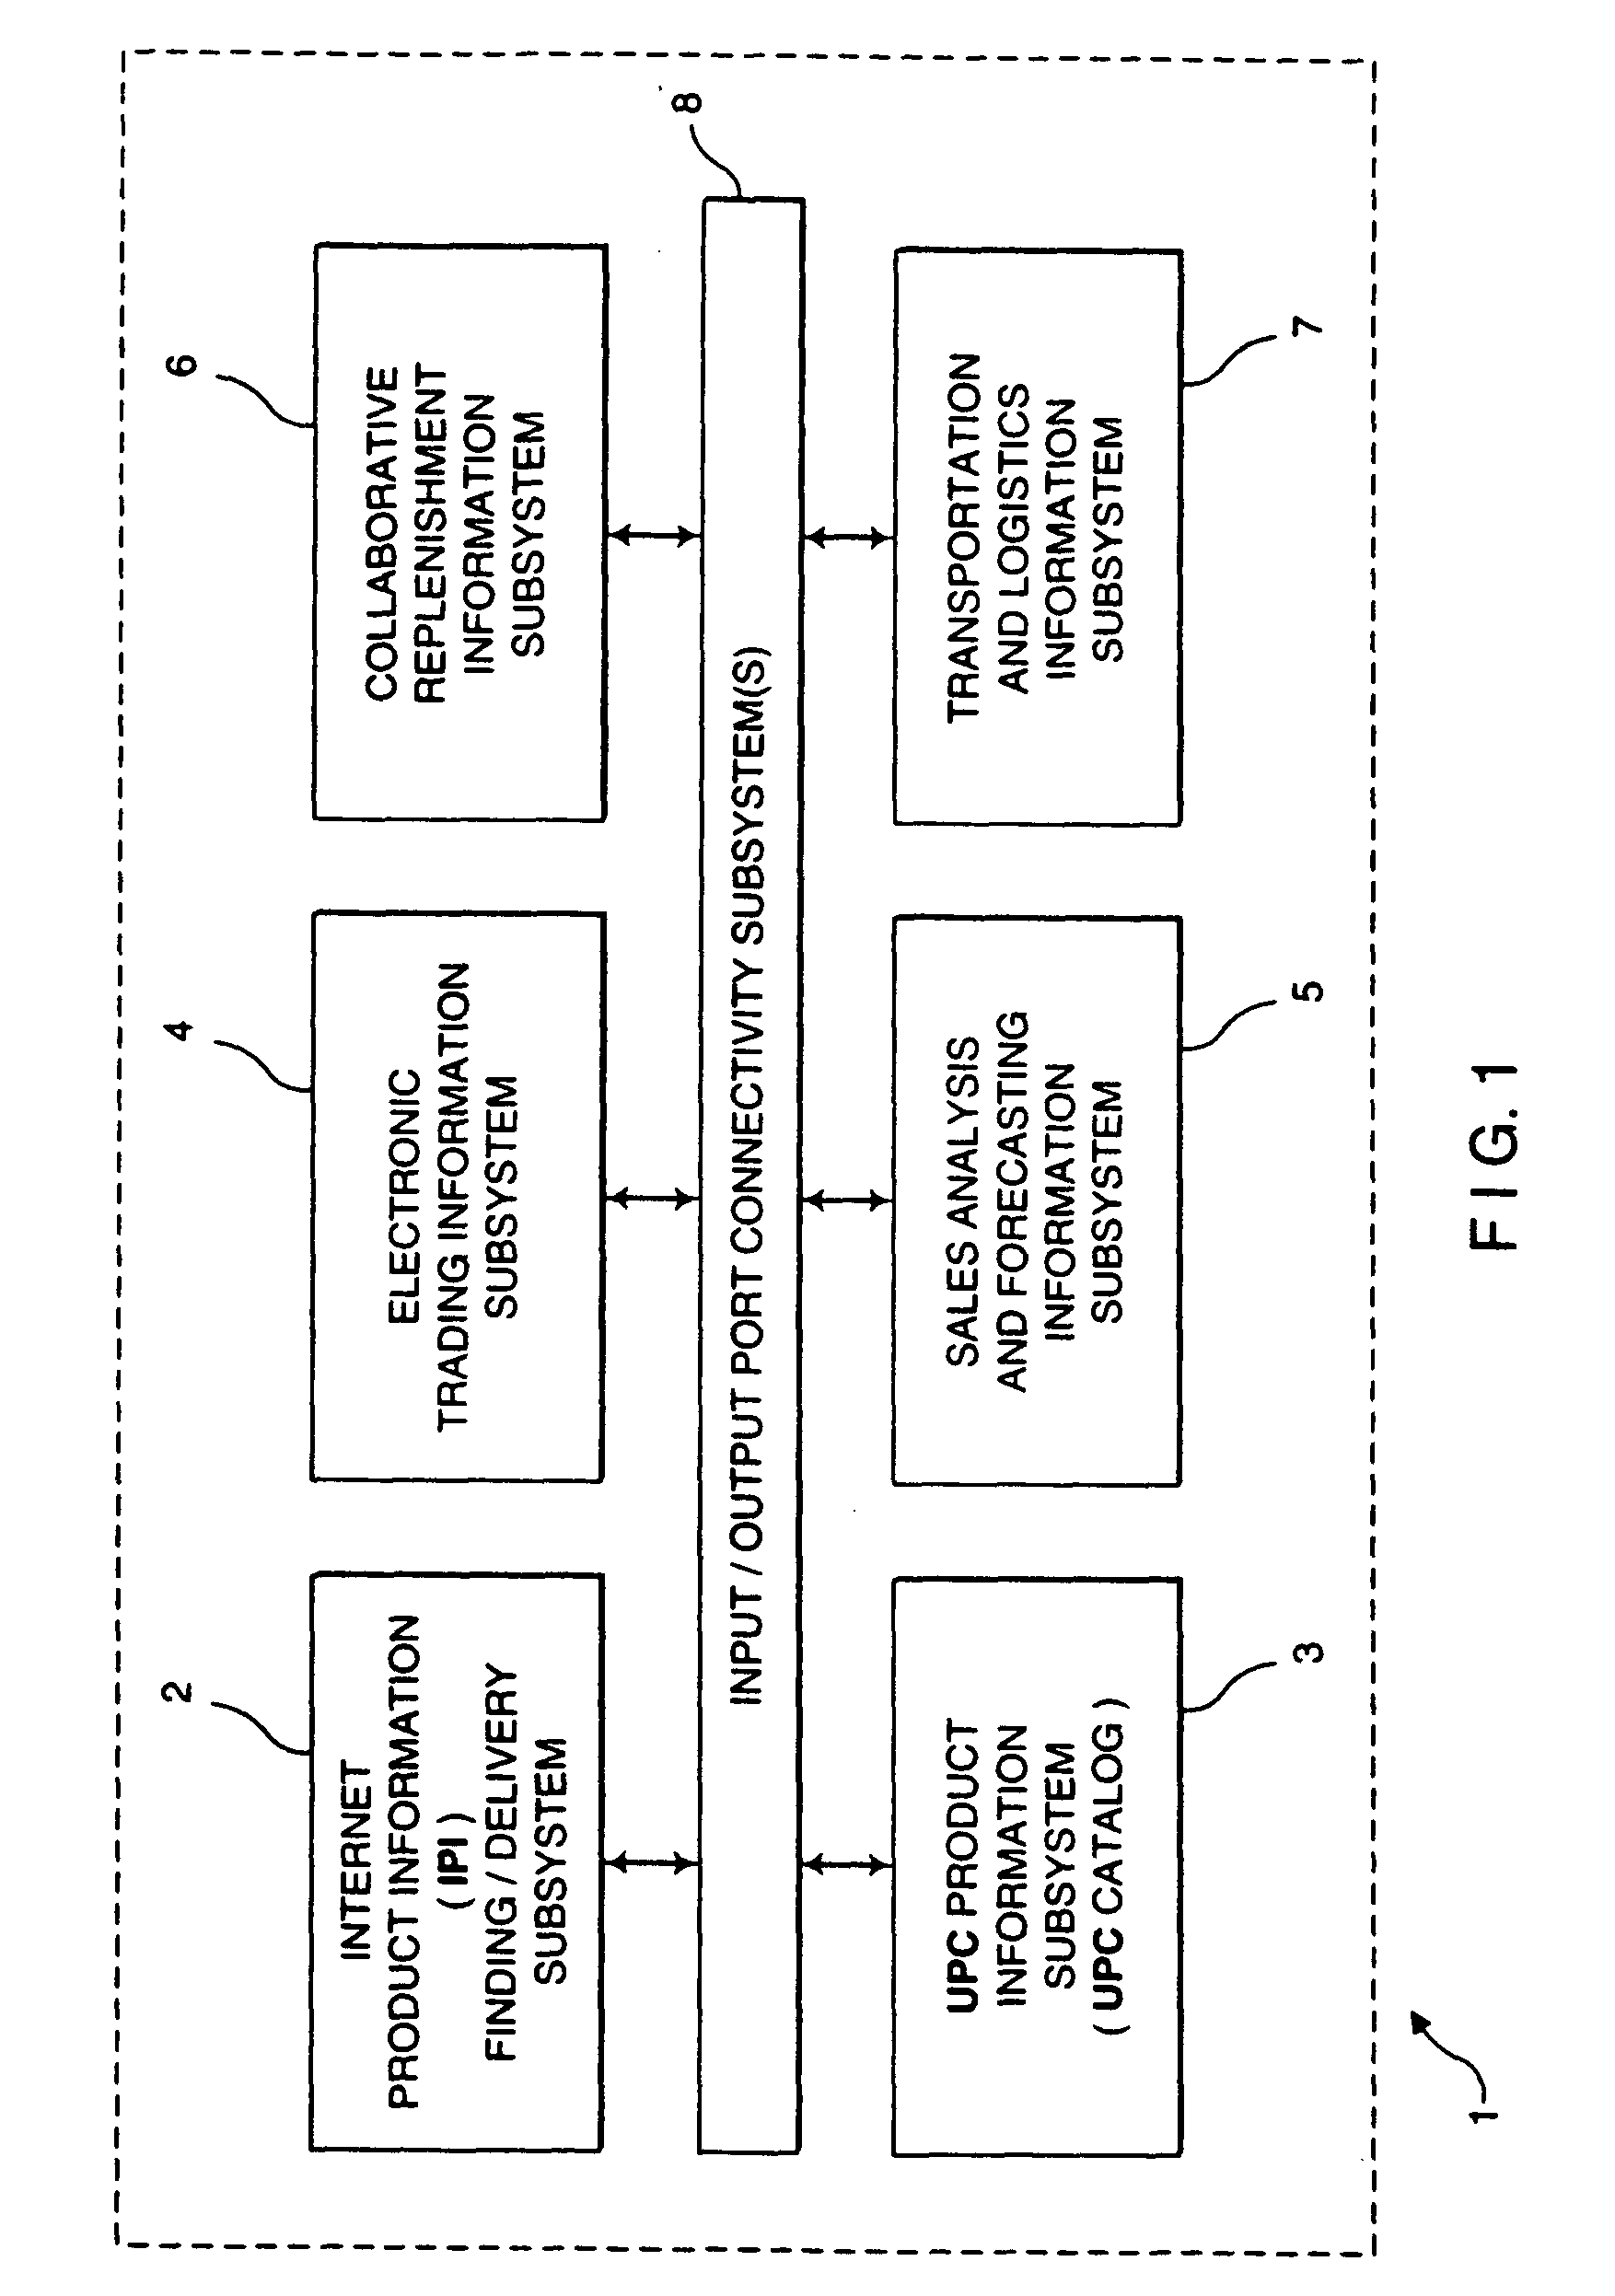 Method of and system for enabling access to consumer product related information and the purchase of consumer products at points of consumer presence on the world wide web (WWW) at which consumer product information request (CPIR) enabling servlet tags are embedded within HTML-encorded documents